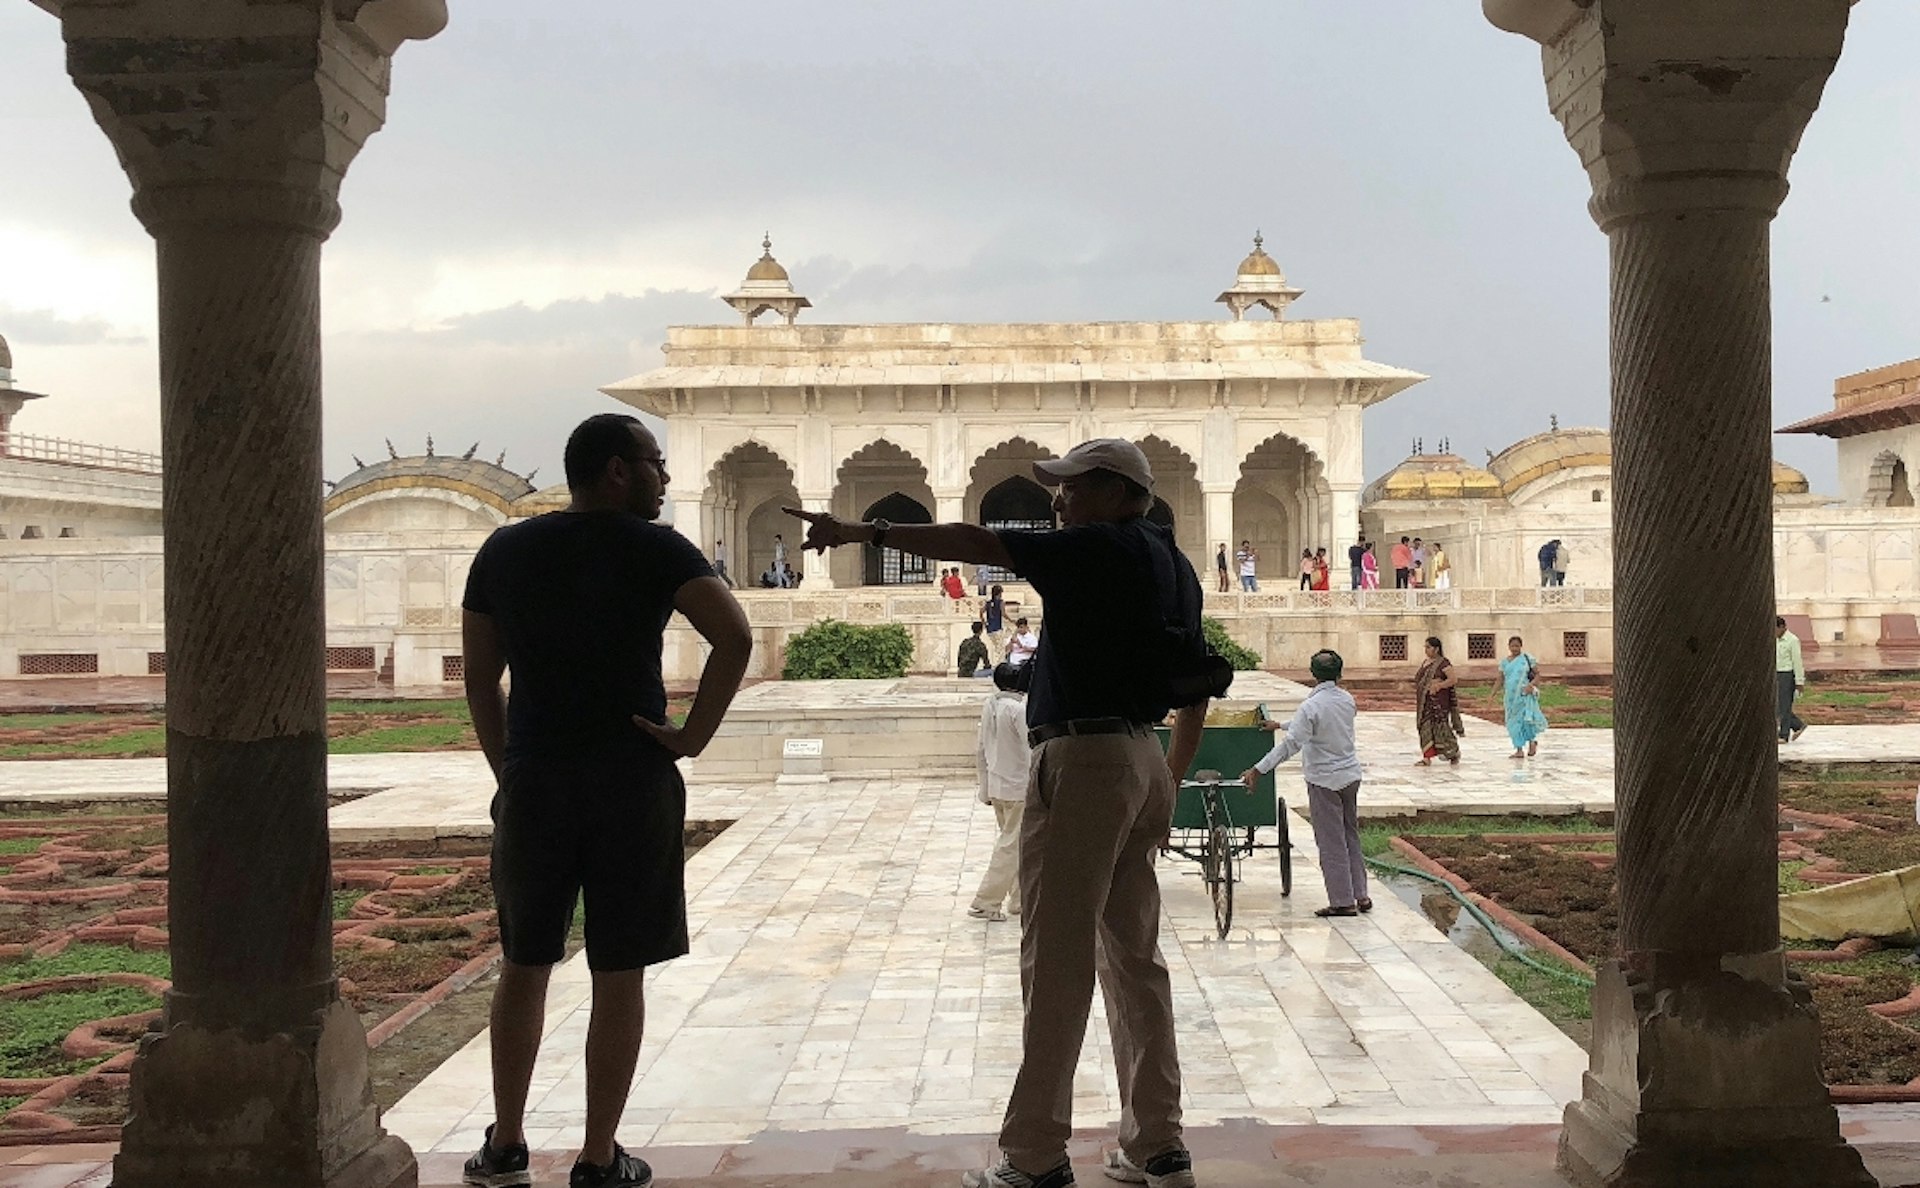 The writer and his father in silhouette at an Indian fortress